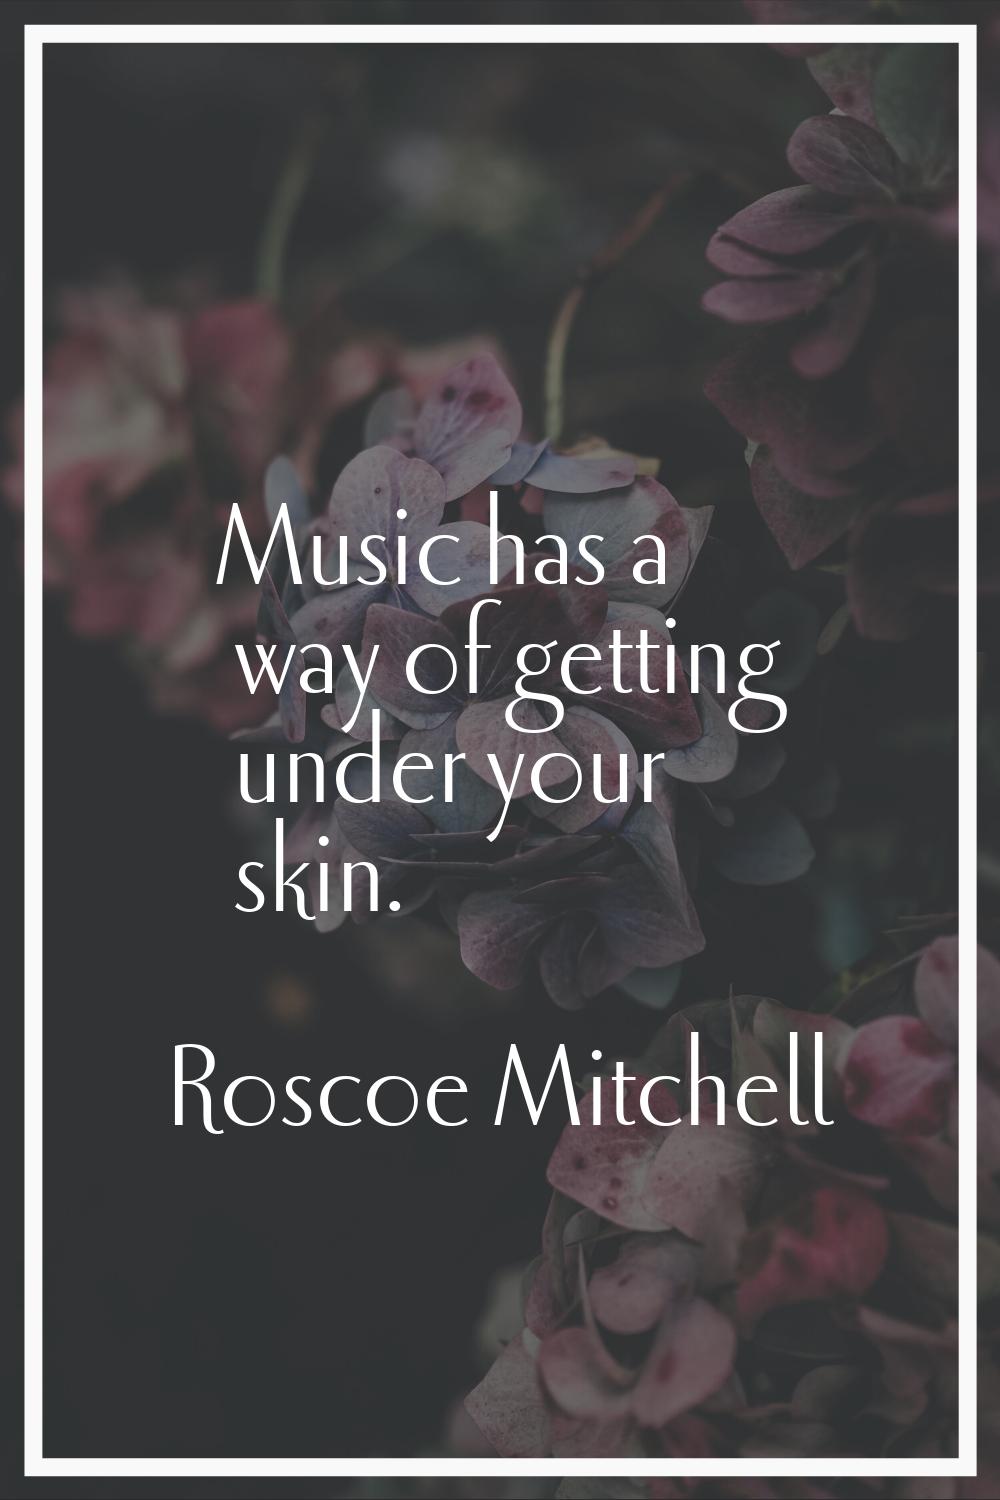 Music has a way of getting under your skin.